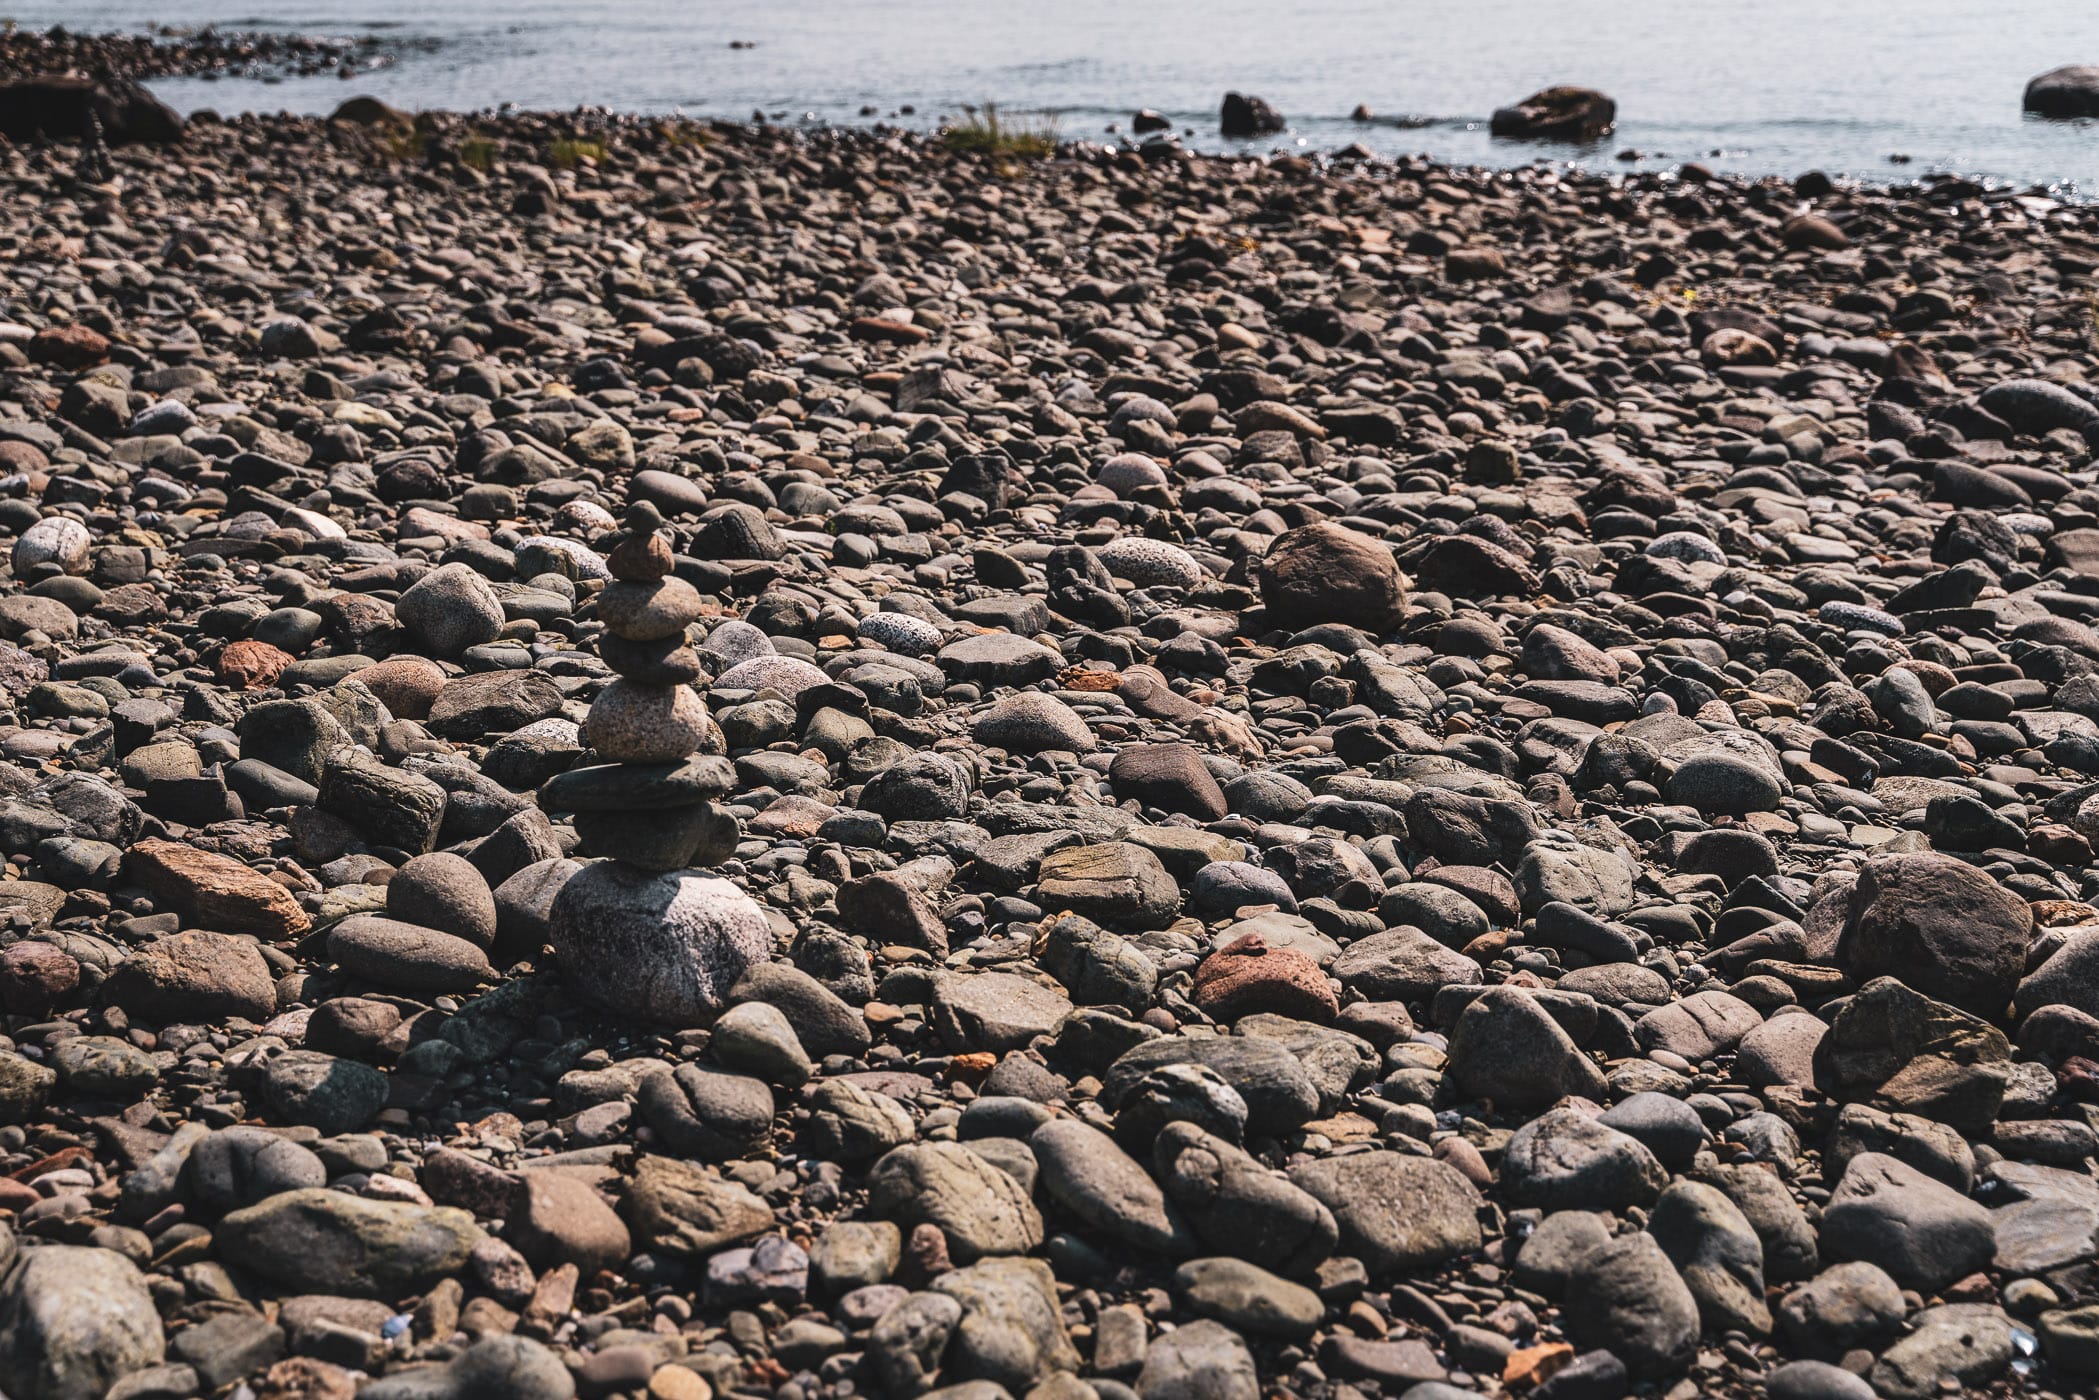 Stones stacked on a rocky shore in Juneau, Alaska.